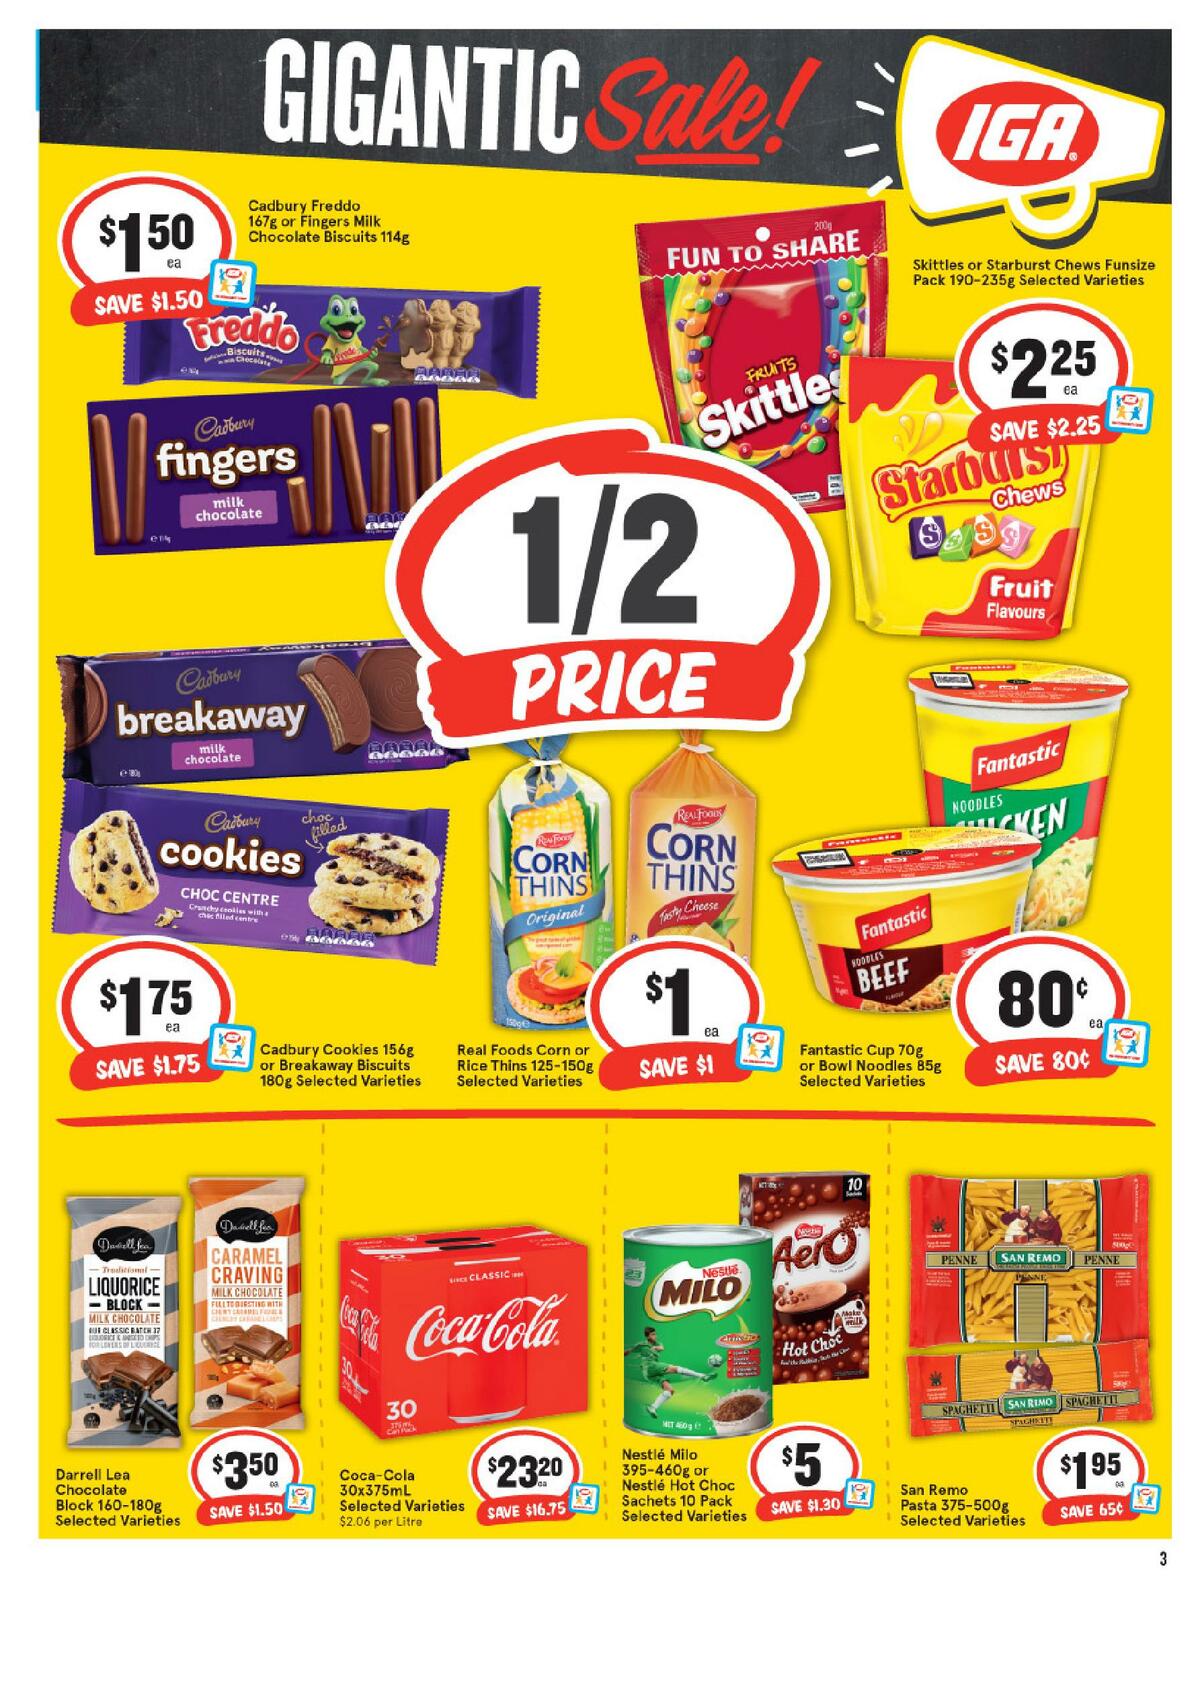 IGA Catalogues from June 9